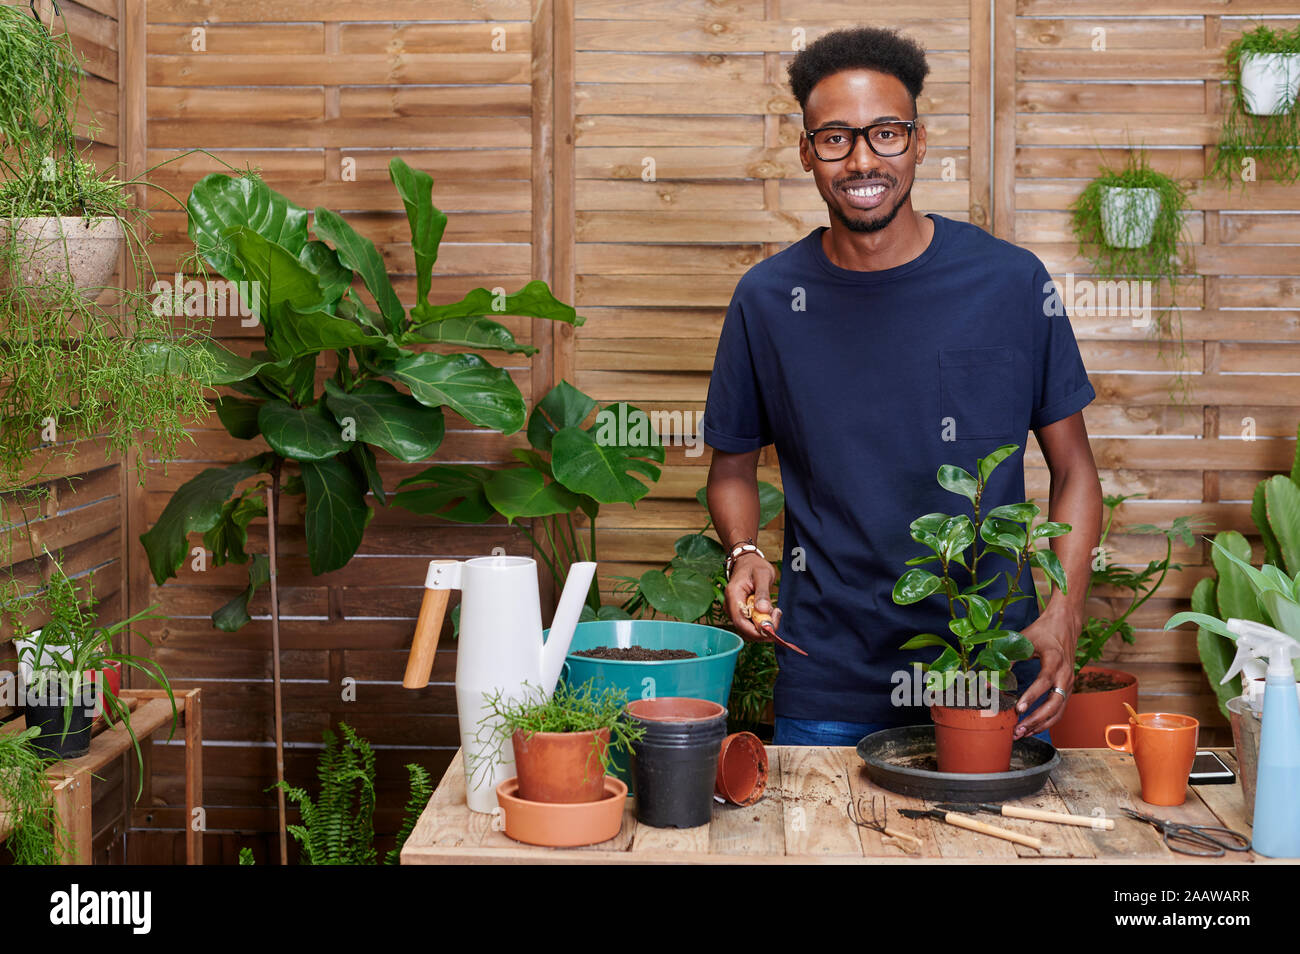 Portrait of a smiling young man repotting a plant on his terrace Stock Photo